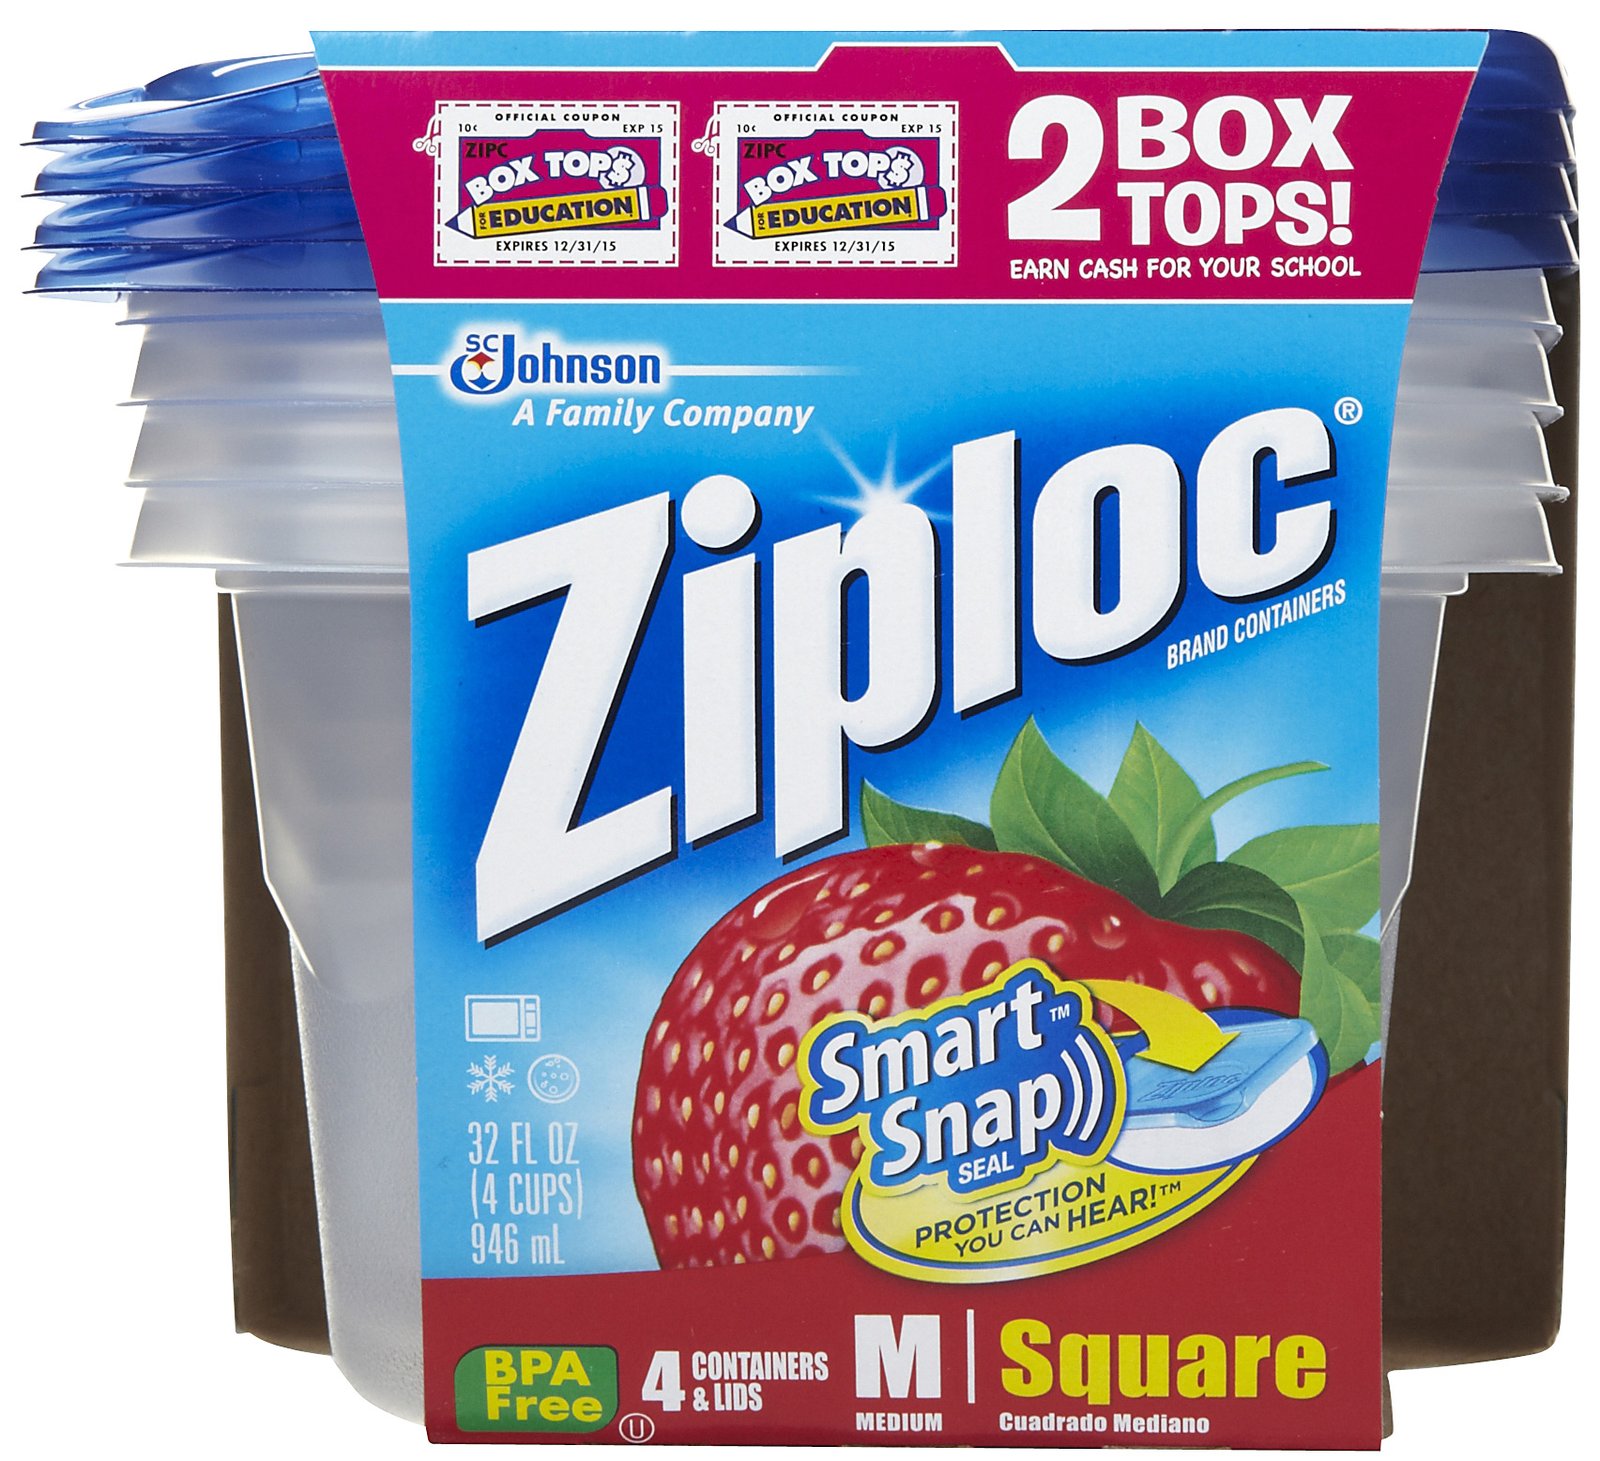 Ziploc Containers As Low As $2.44 at Publix